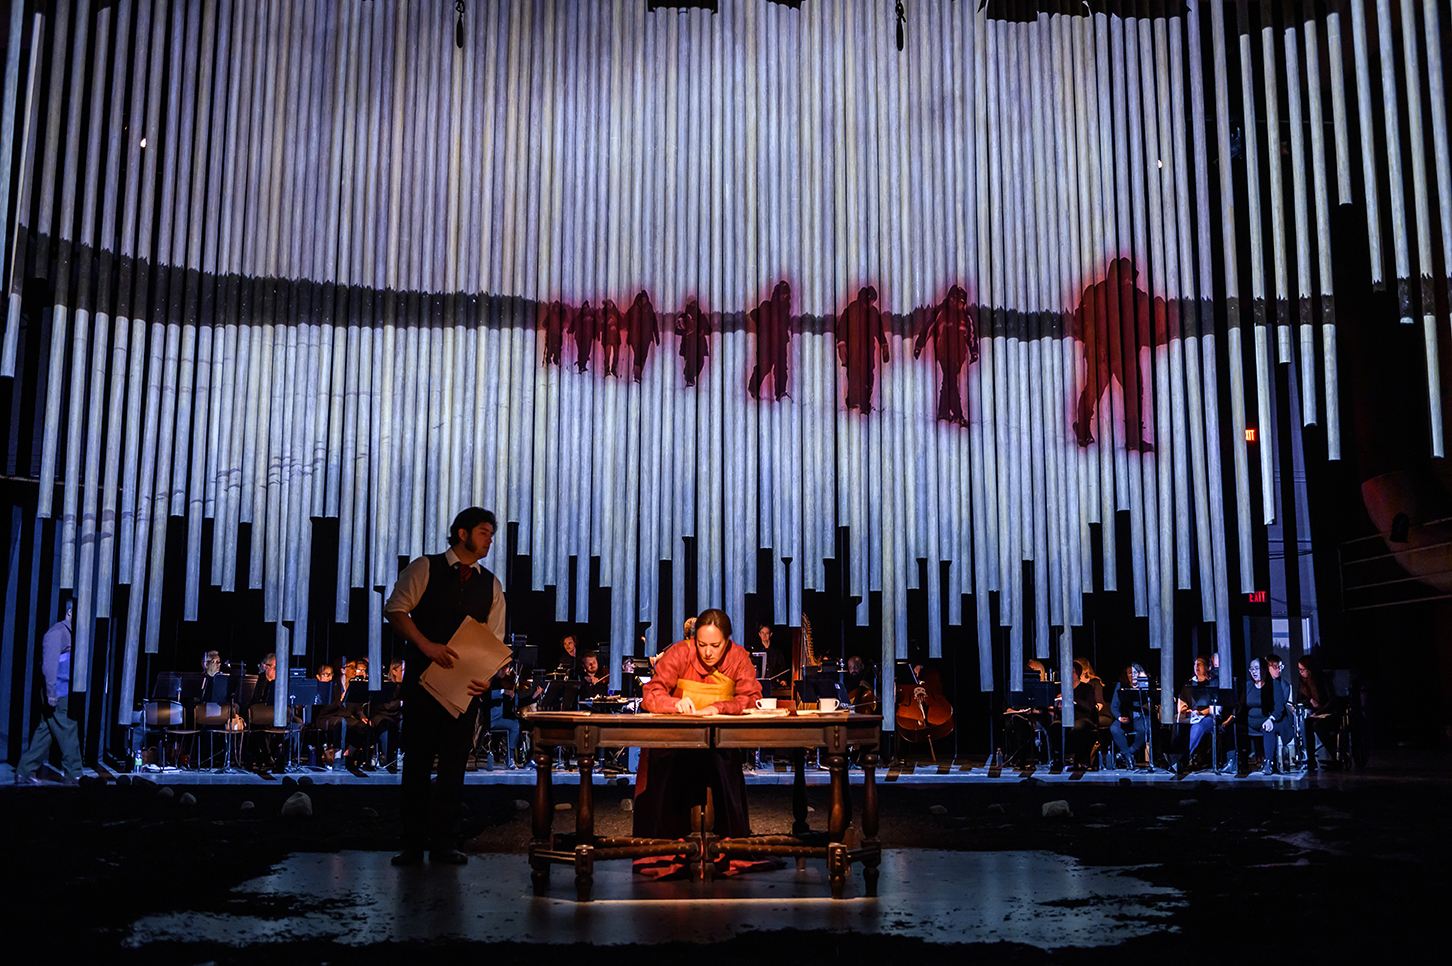   Shanawdithit Opera,  2019   Materials:  Printed Polysilk elements as part of Shanawdithit production  Photo:  Tapestry Opera  Installation commissioned by  Tapestry Opera  and  Opera on the Avalon  Performed at Joey and Toby Tanenbaum Opera Centre 